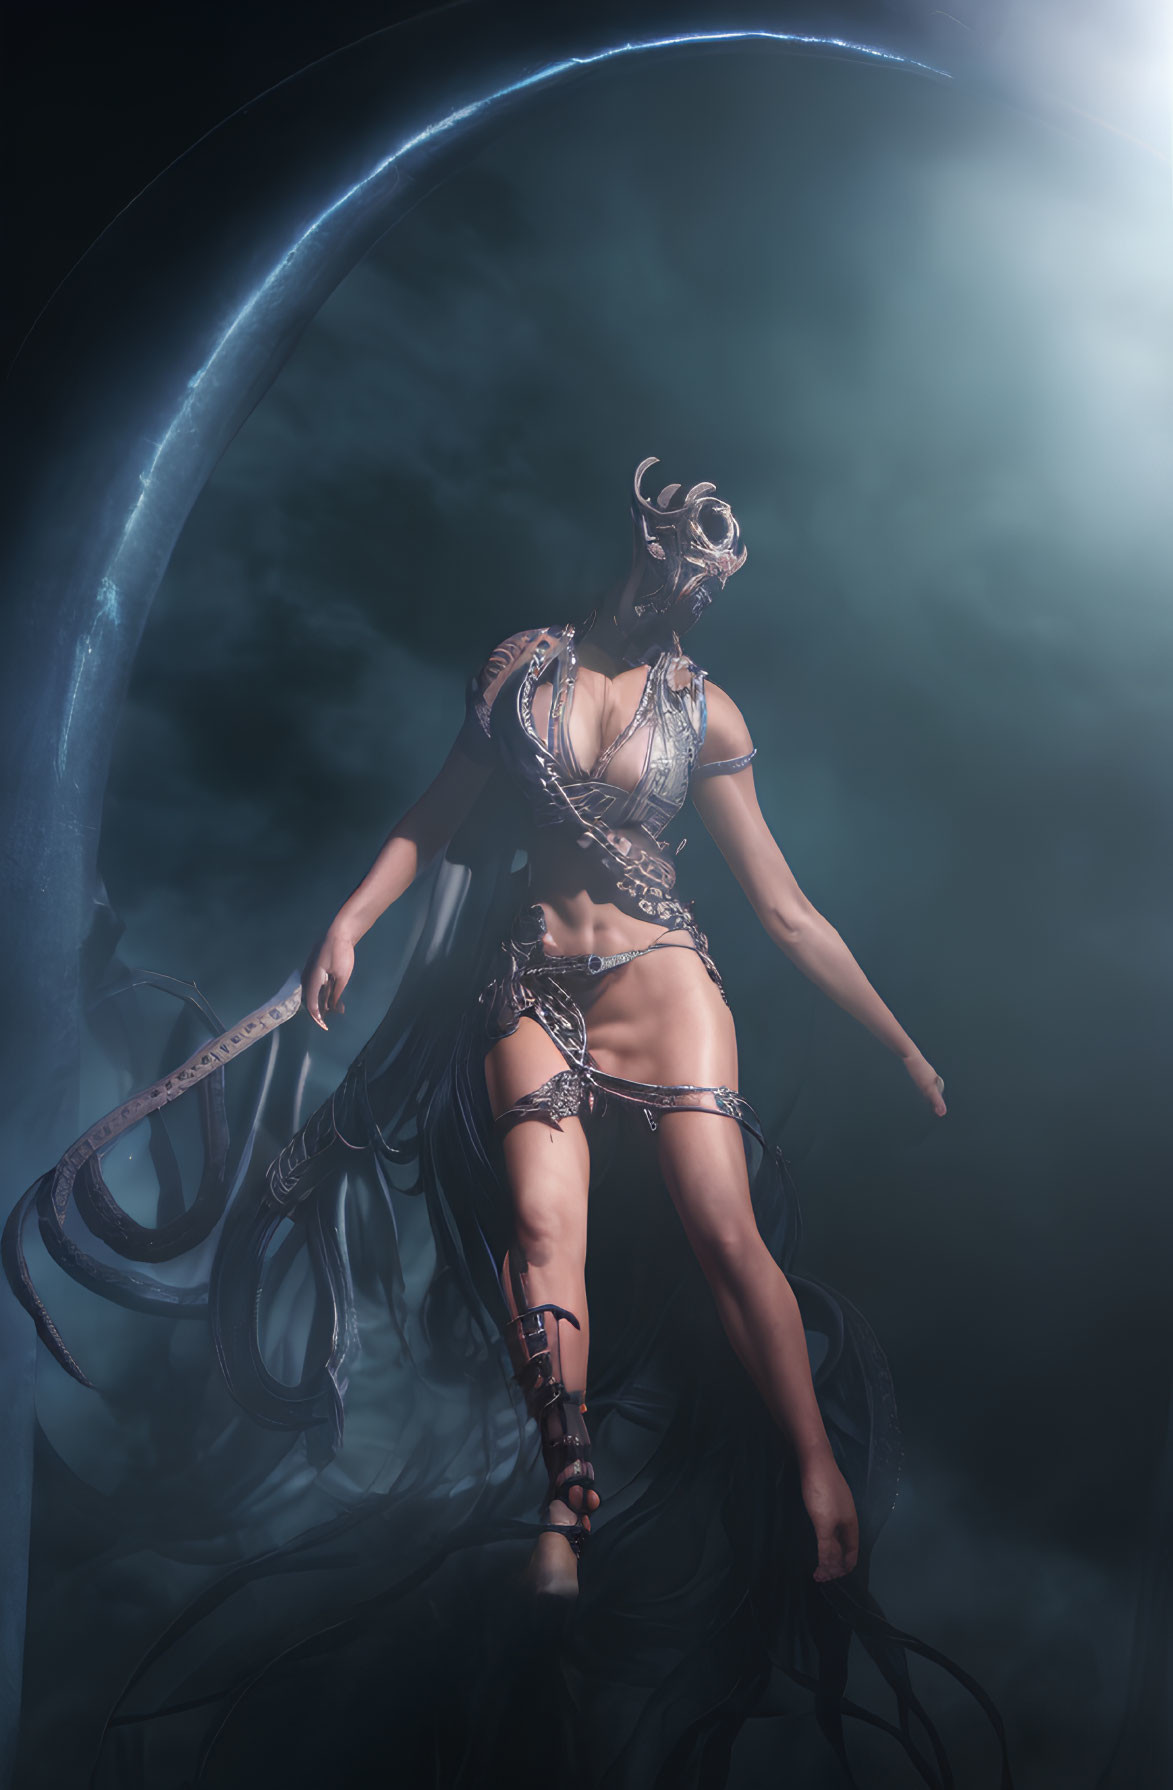 Mystical female figure in horned mask and dark fantasy costume with swirling mist and tentacle-like